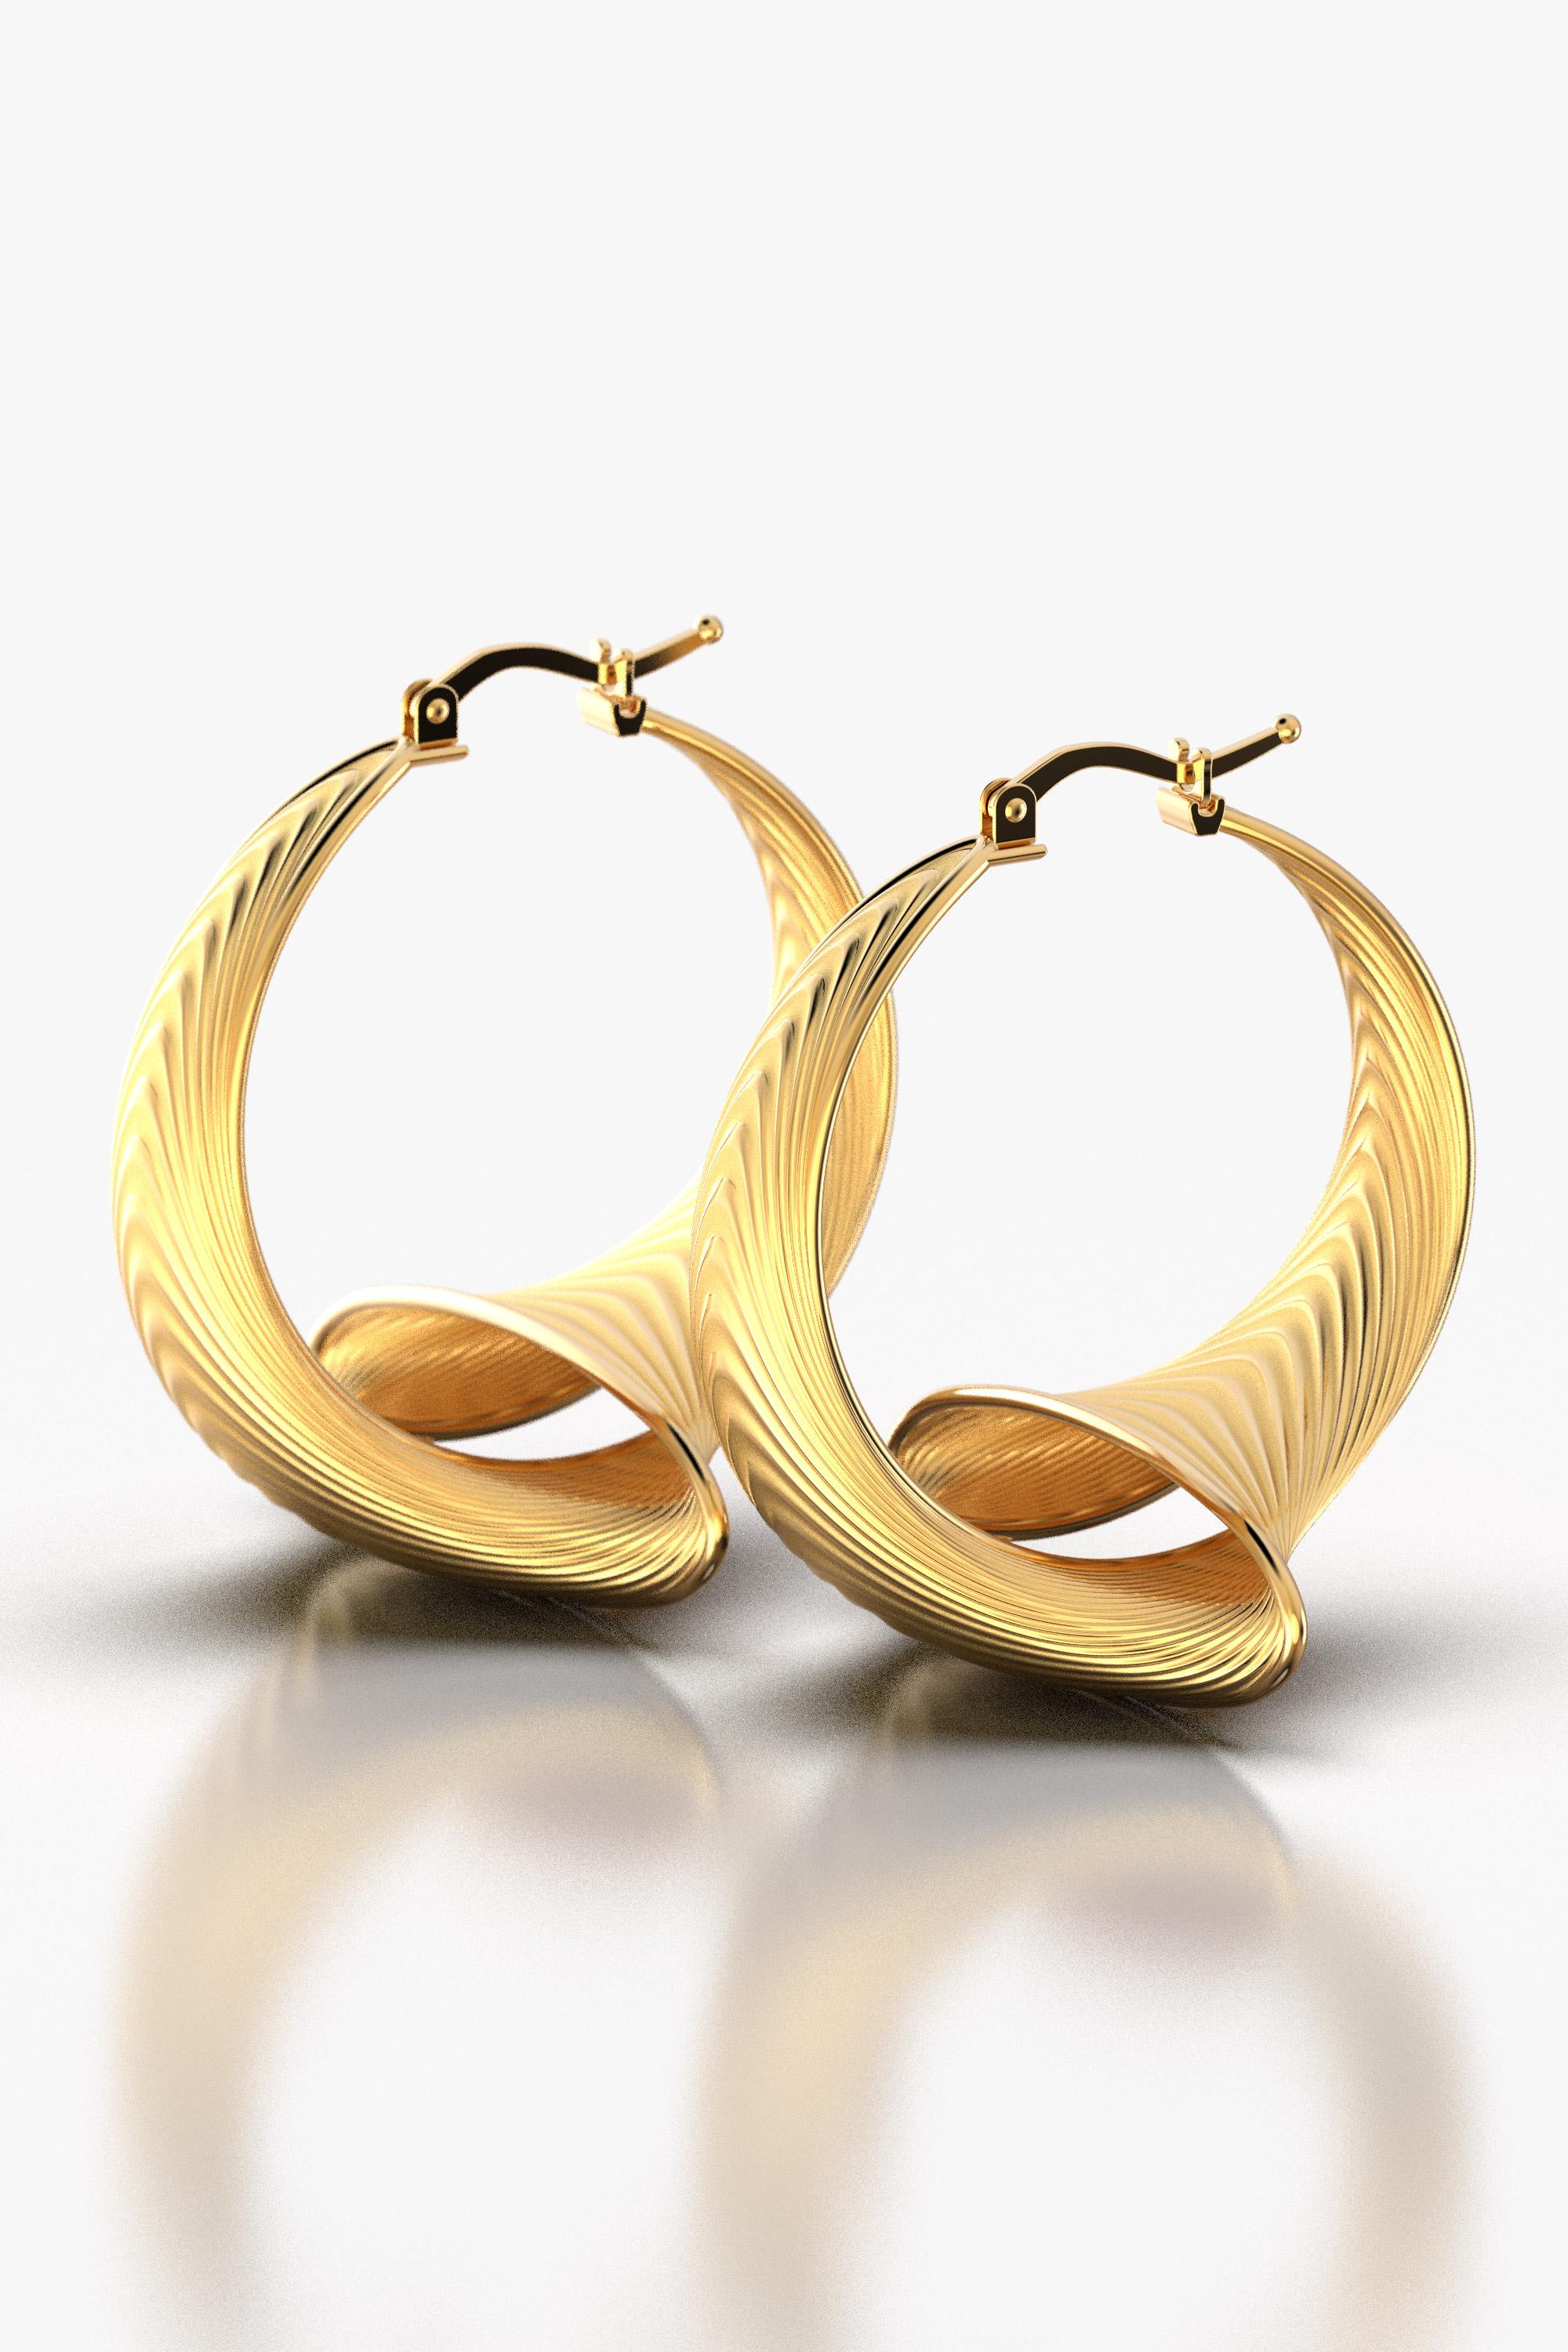 Oltremare Gioielli 18k Gold Hoop Earrings Made in Italy, Italian Gold Jewelry For Sale 4